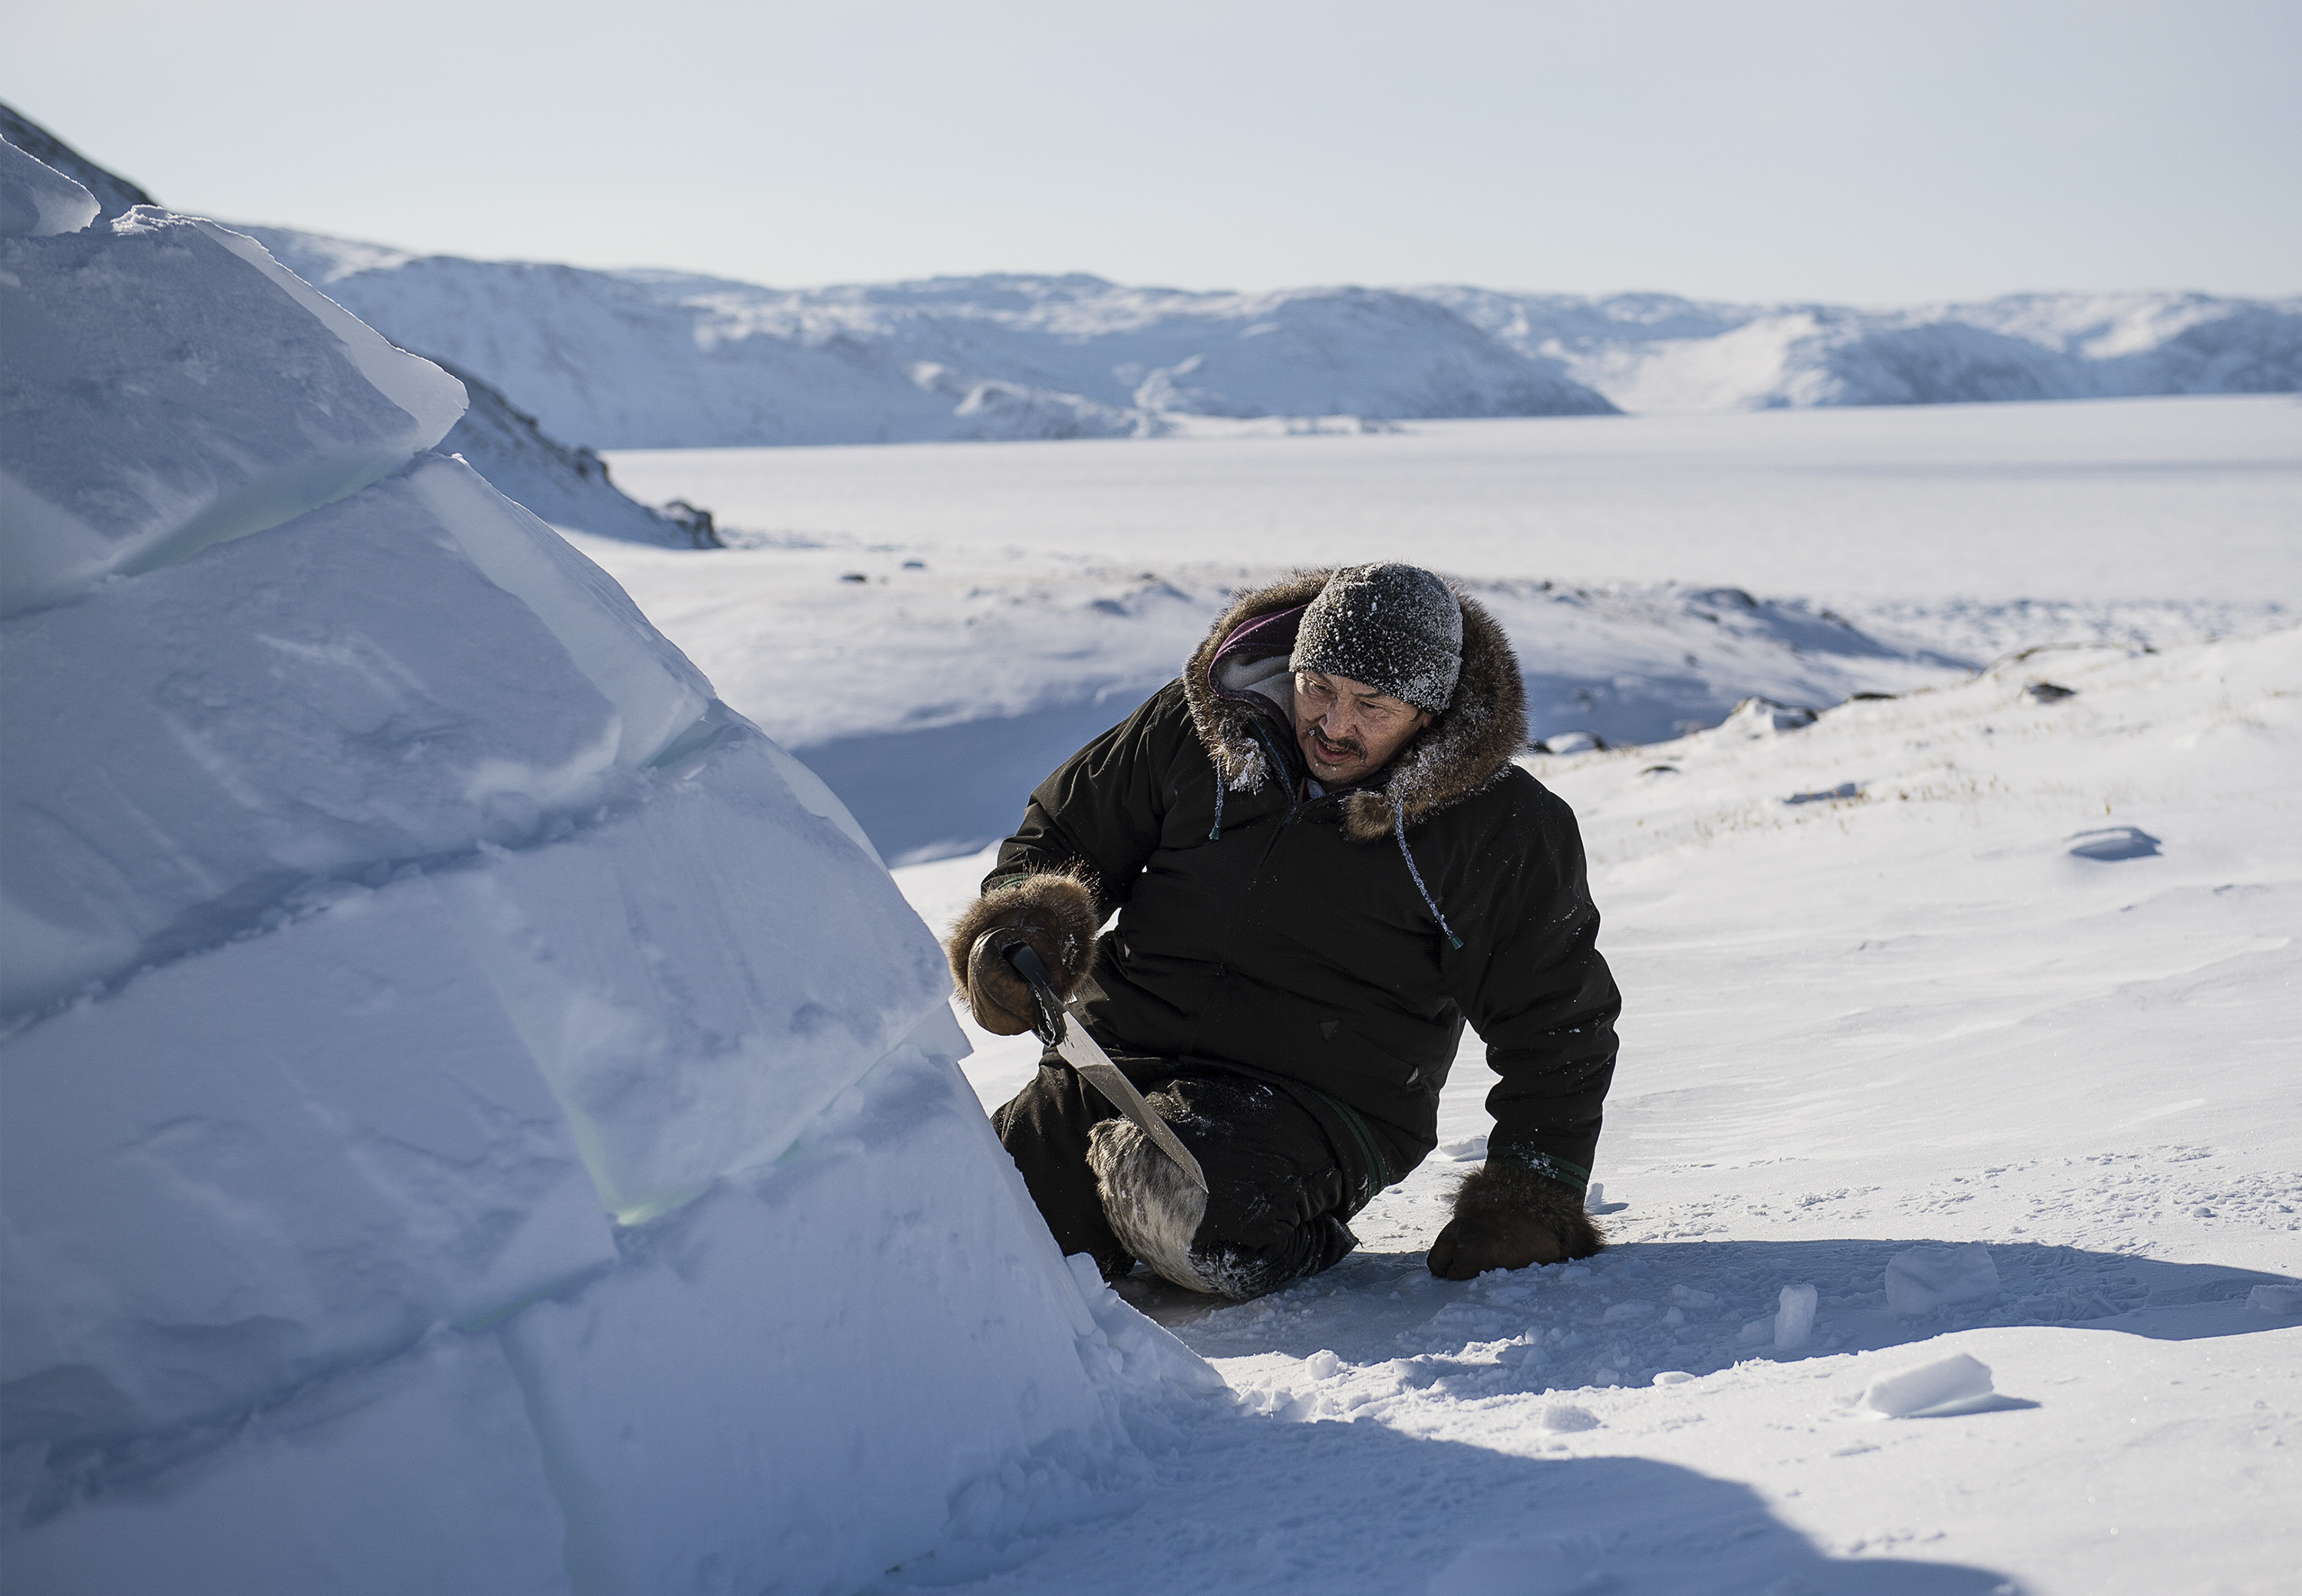 Adami Sakiagak demonstrates how to build an igloo near Kangiqsujuaq, Nunavik, Quebec, Canada, March 2, 2017. Sakiagak, a 57-year-old Inuit, builds igloos to teach younger generations the disappearing craft. (Aaron Vincent Elkaim / The New York Times)